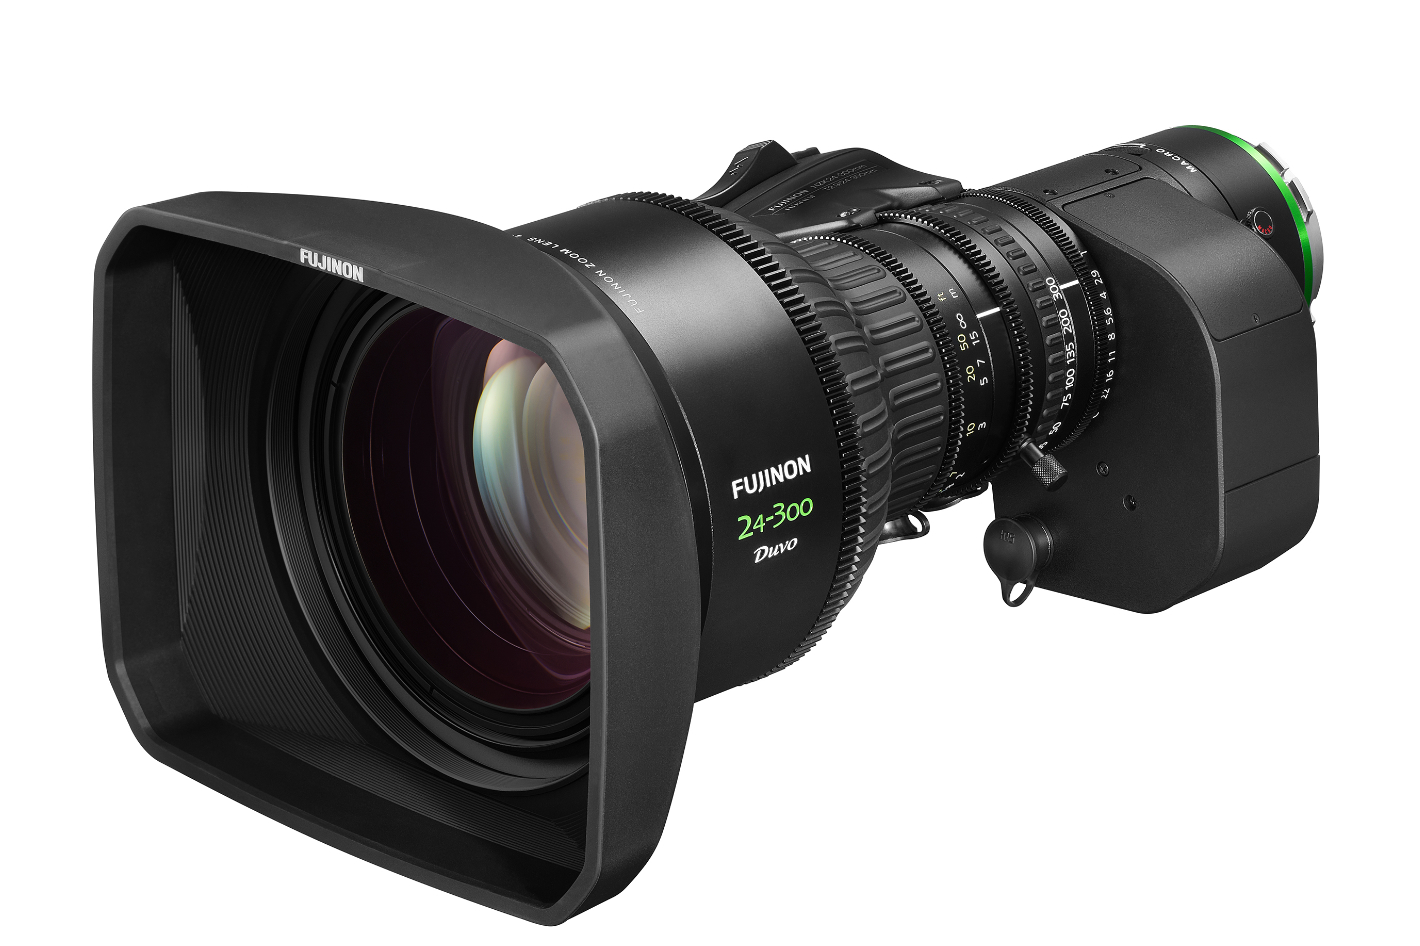 FUJINON Duvo HZK24-300mm PL Mount Zoom Lens now available 4